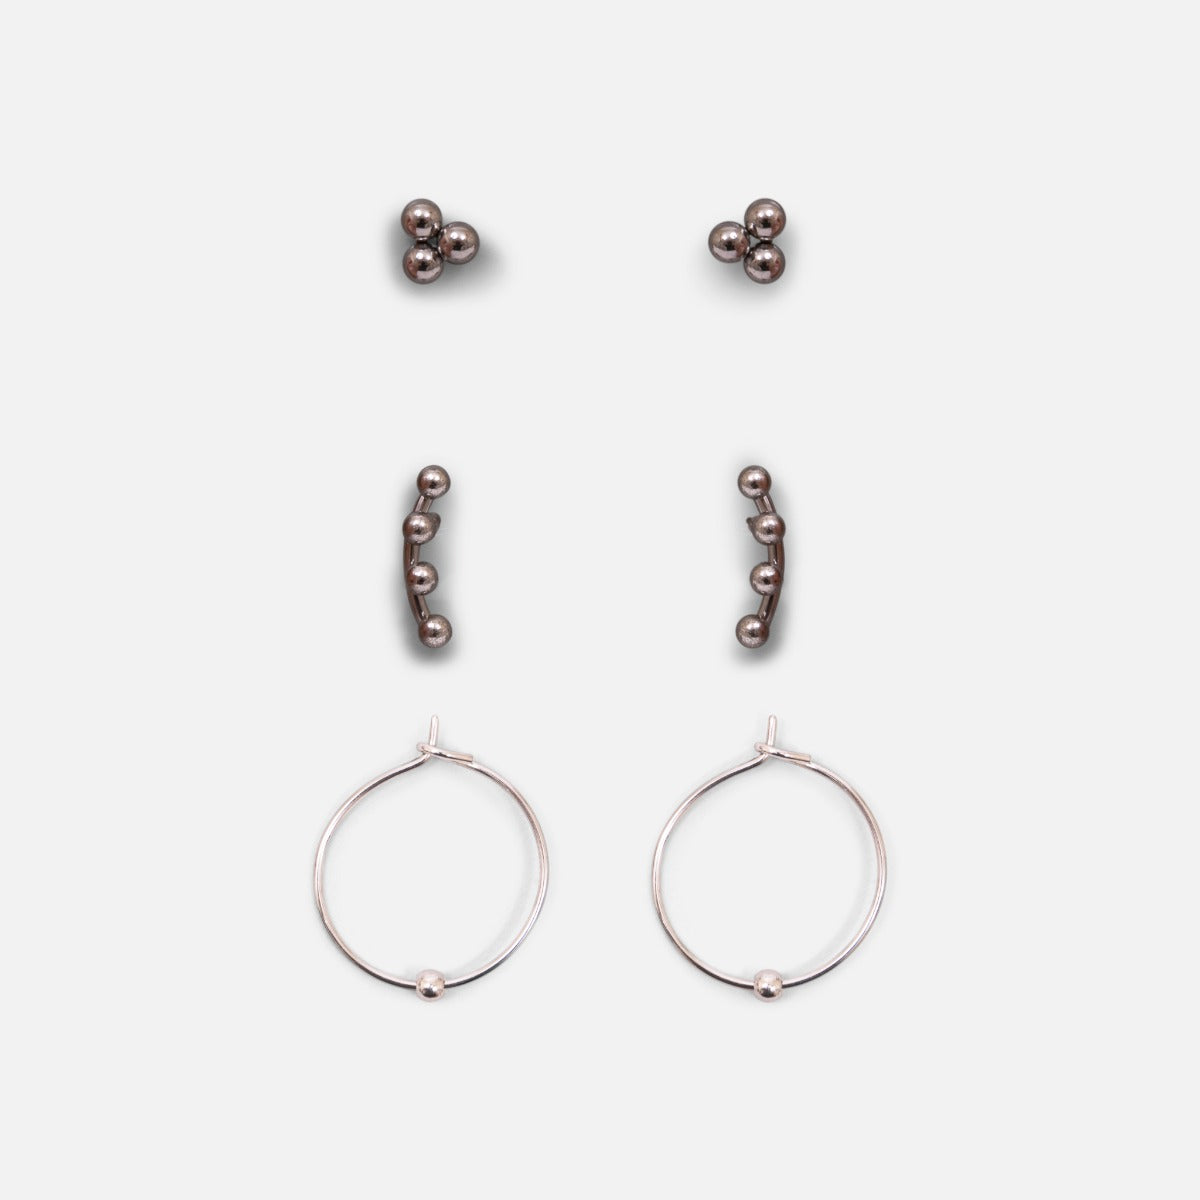 Set of three silver stainless steel stud earrings with hoops and beads